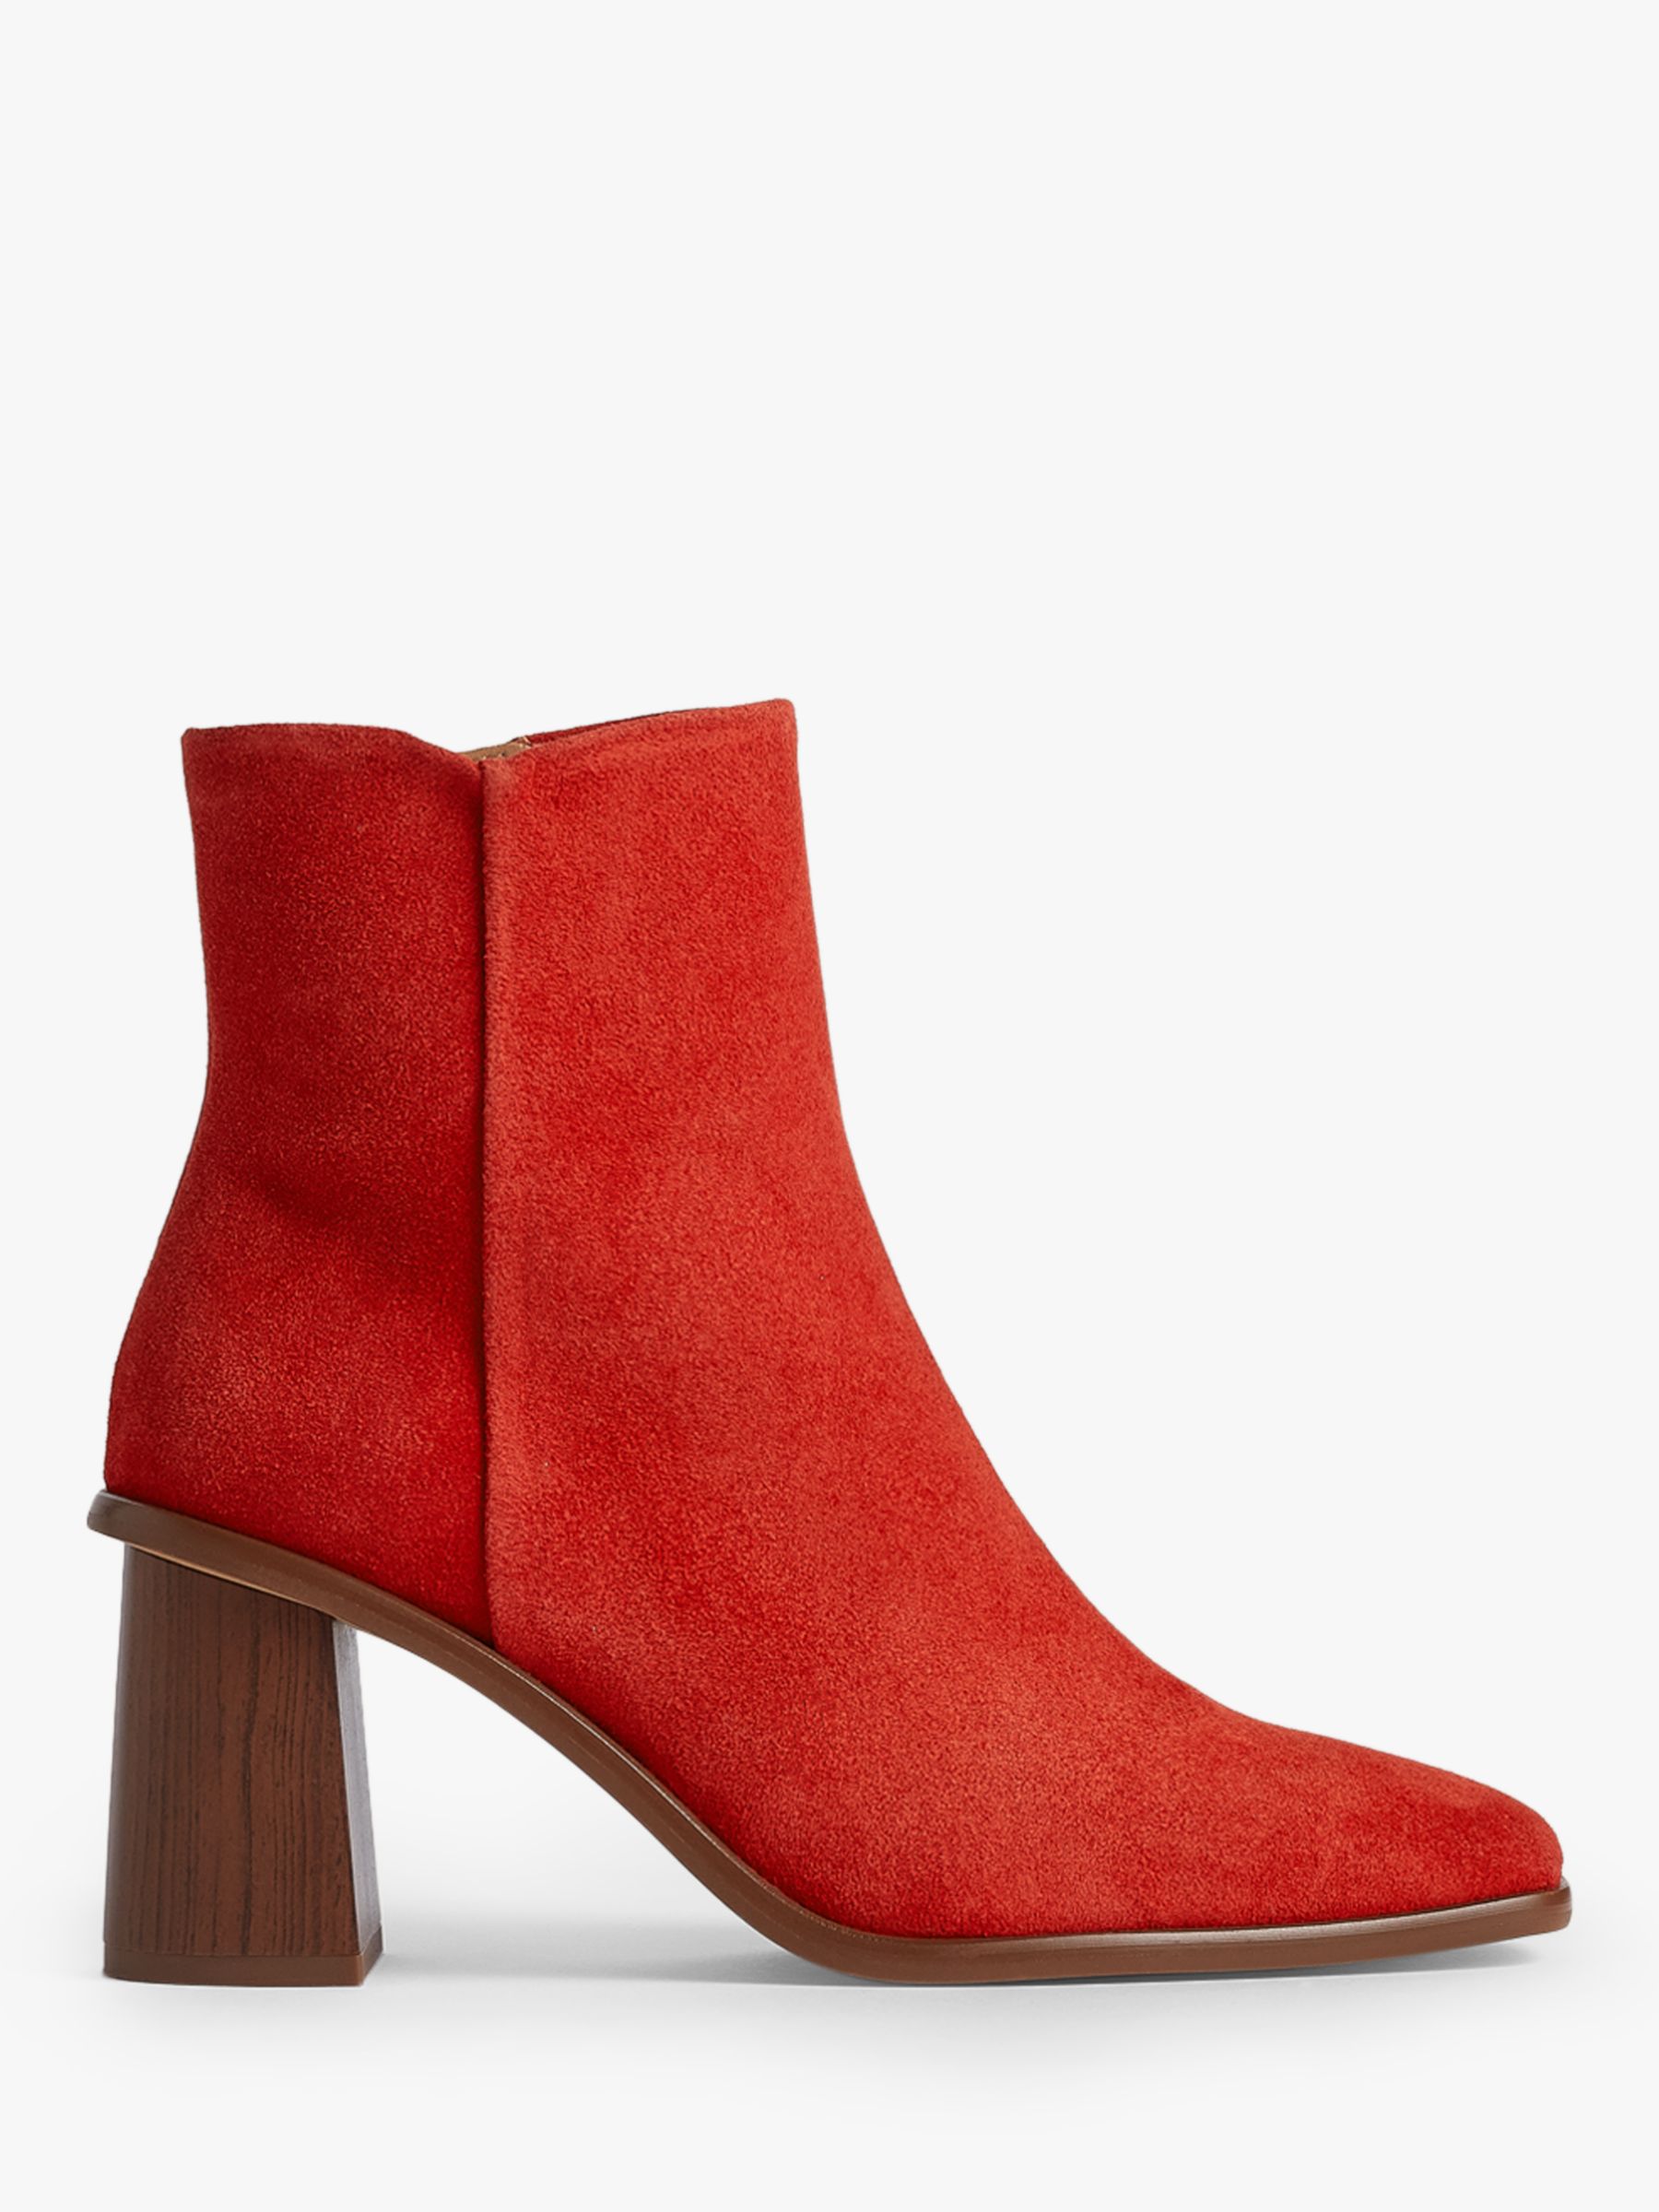 Jigsaw Conduit Suede Ankle Boots, Red at John Lewis & Partners